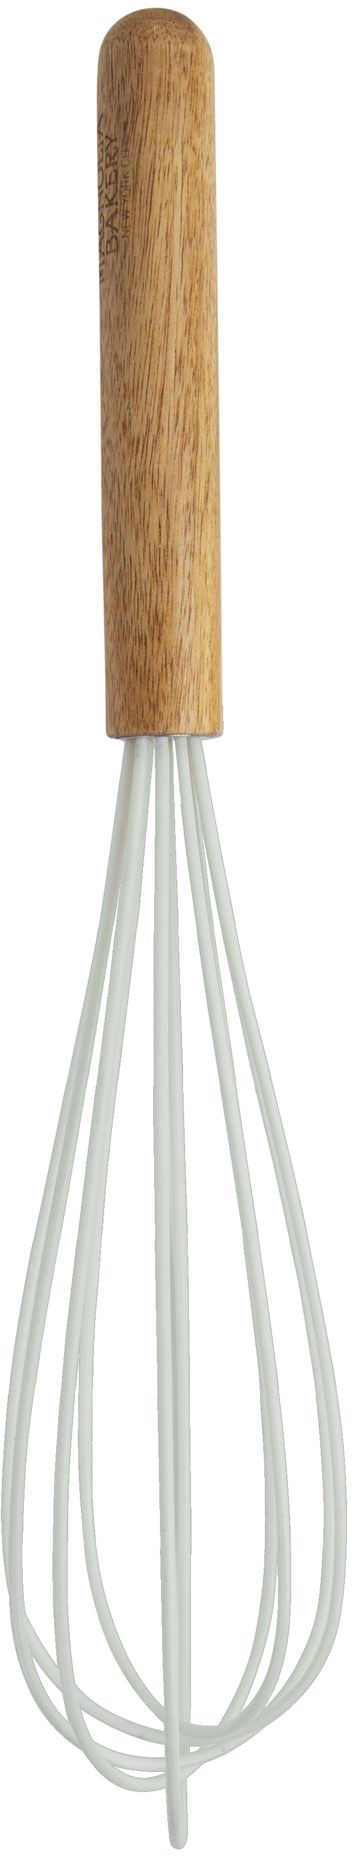 MAGNOLIA BAKERY SILICONE WHISK - GREEN